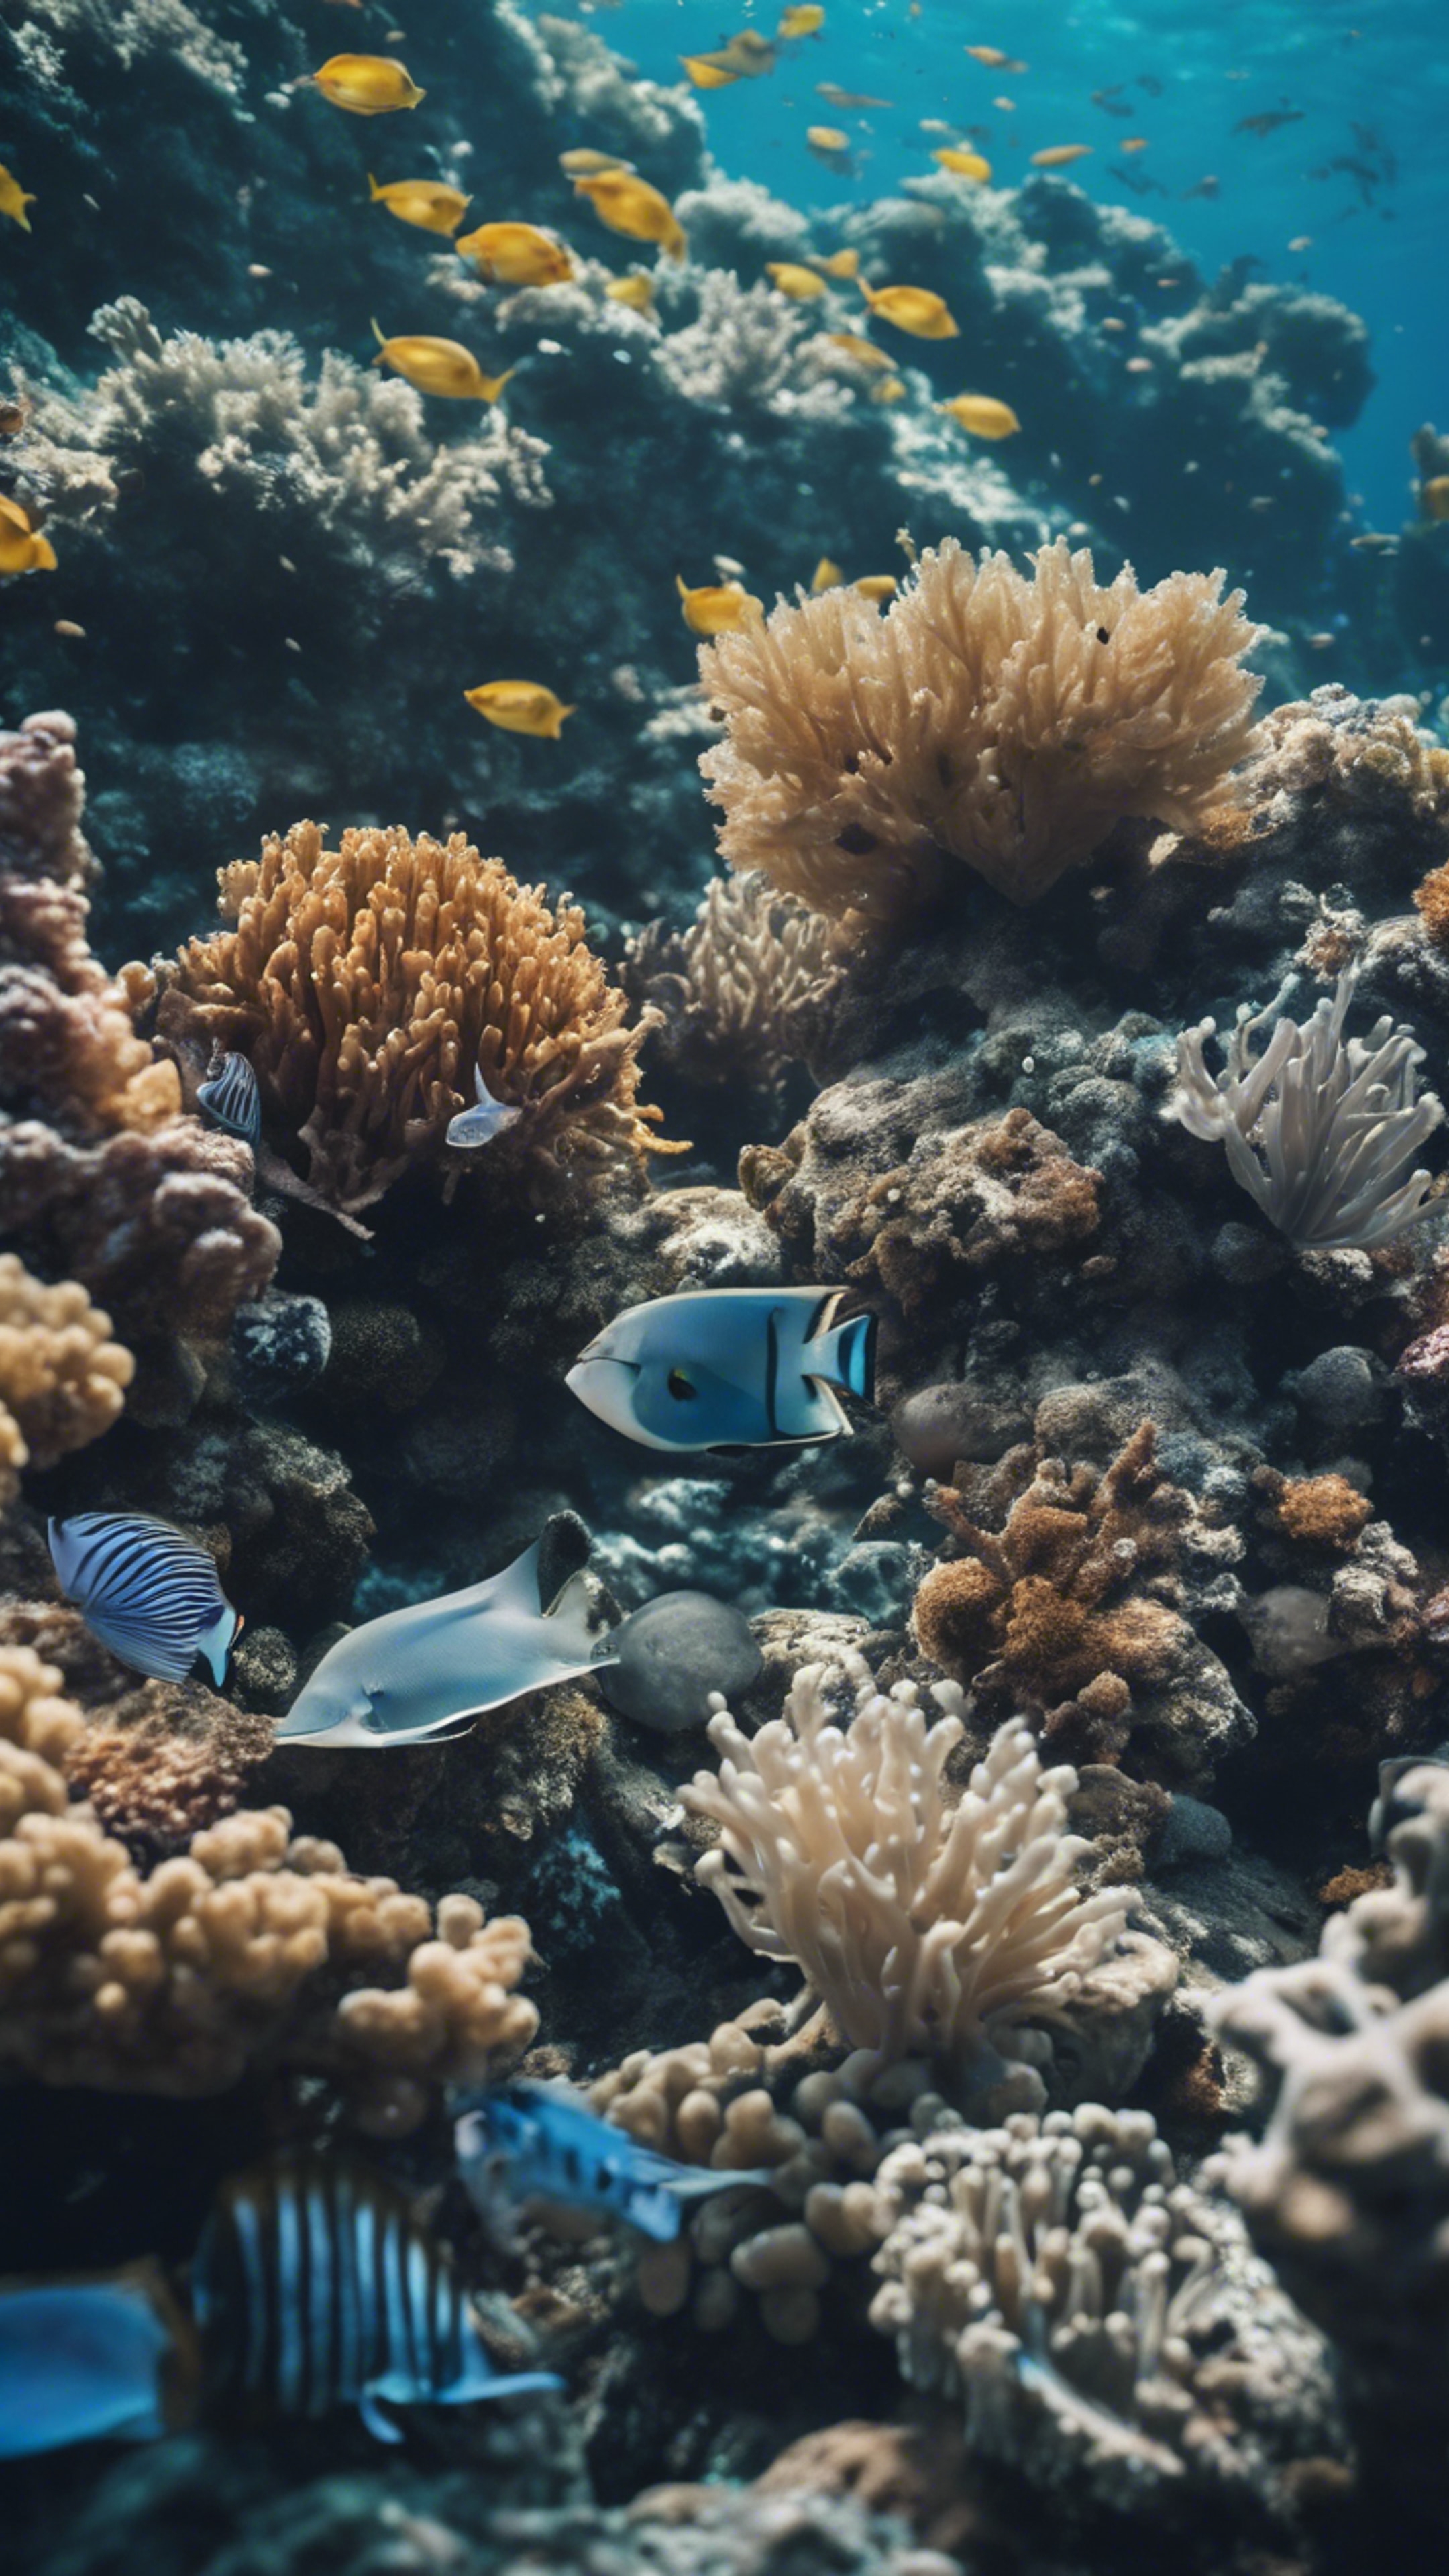 A reef teeming with cool-blue marine life in a vast ocean壁紙[6459858a1a1d4b9c925e]